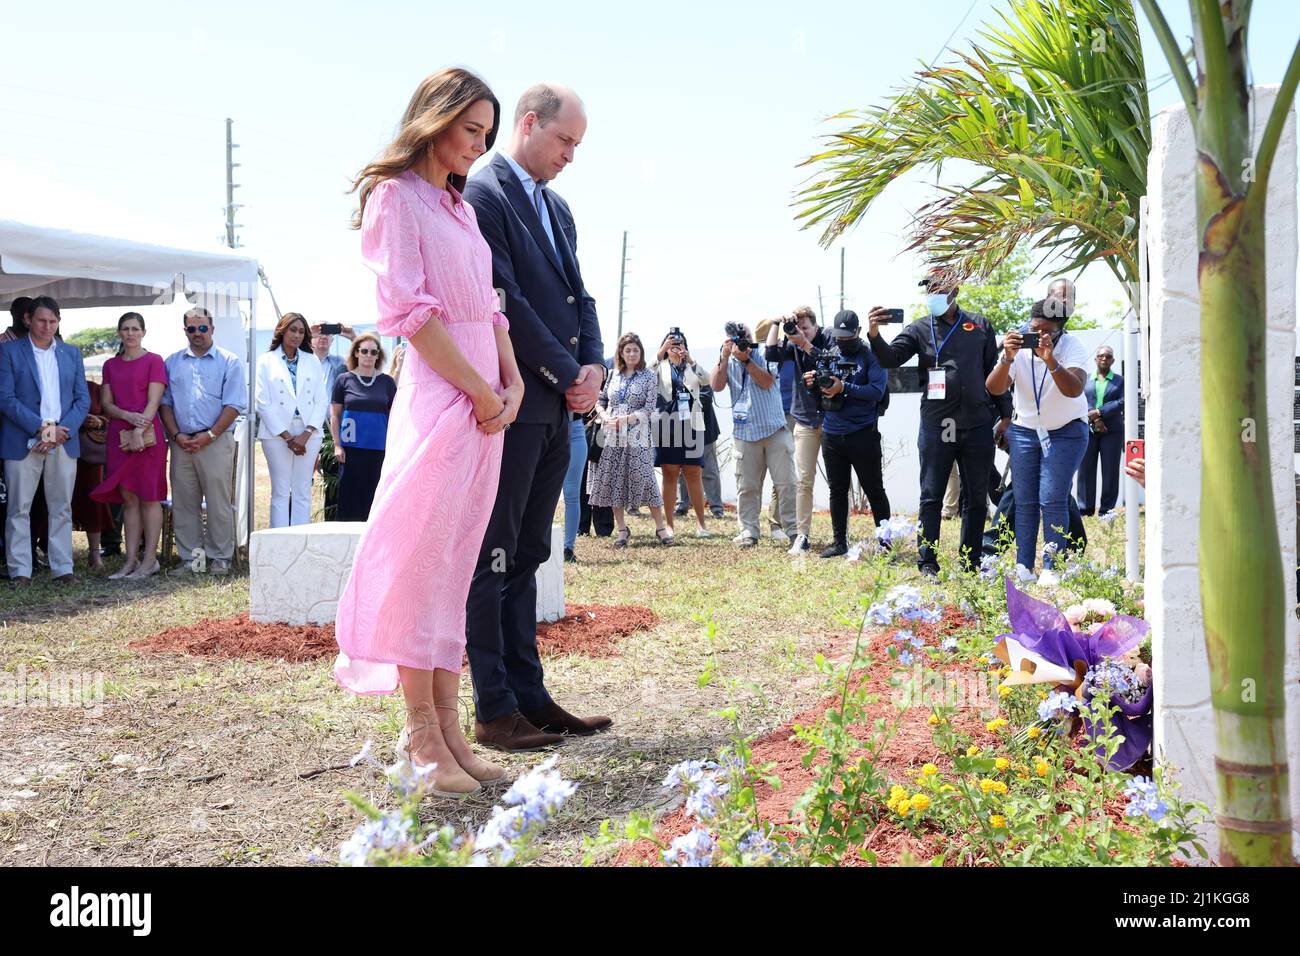 The Duke and Duchess of Cambridge during a visit to the Memorial Wall to remember victims of the 2019 hurricane at the Memorial Garden in Abaco, on day eight of their tour of the Caribbean on behalf of the Queen to mark her Platinum Jubilee. Abaco, a chain of islands and barrier cays in the northern Bahamas, was hit by winds of up to 185mph during Hurricane Dorian in 2019 leaving 75% of homes across the chain of islands damaged and resulting in tragic loss of life. Picture date: Saturday March 26, 2022. Stock Photo